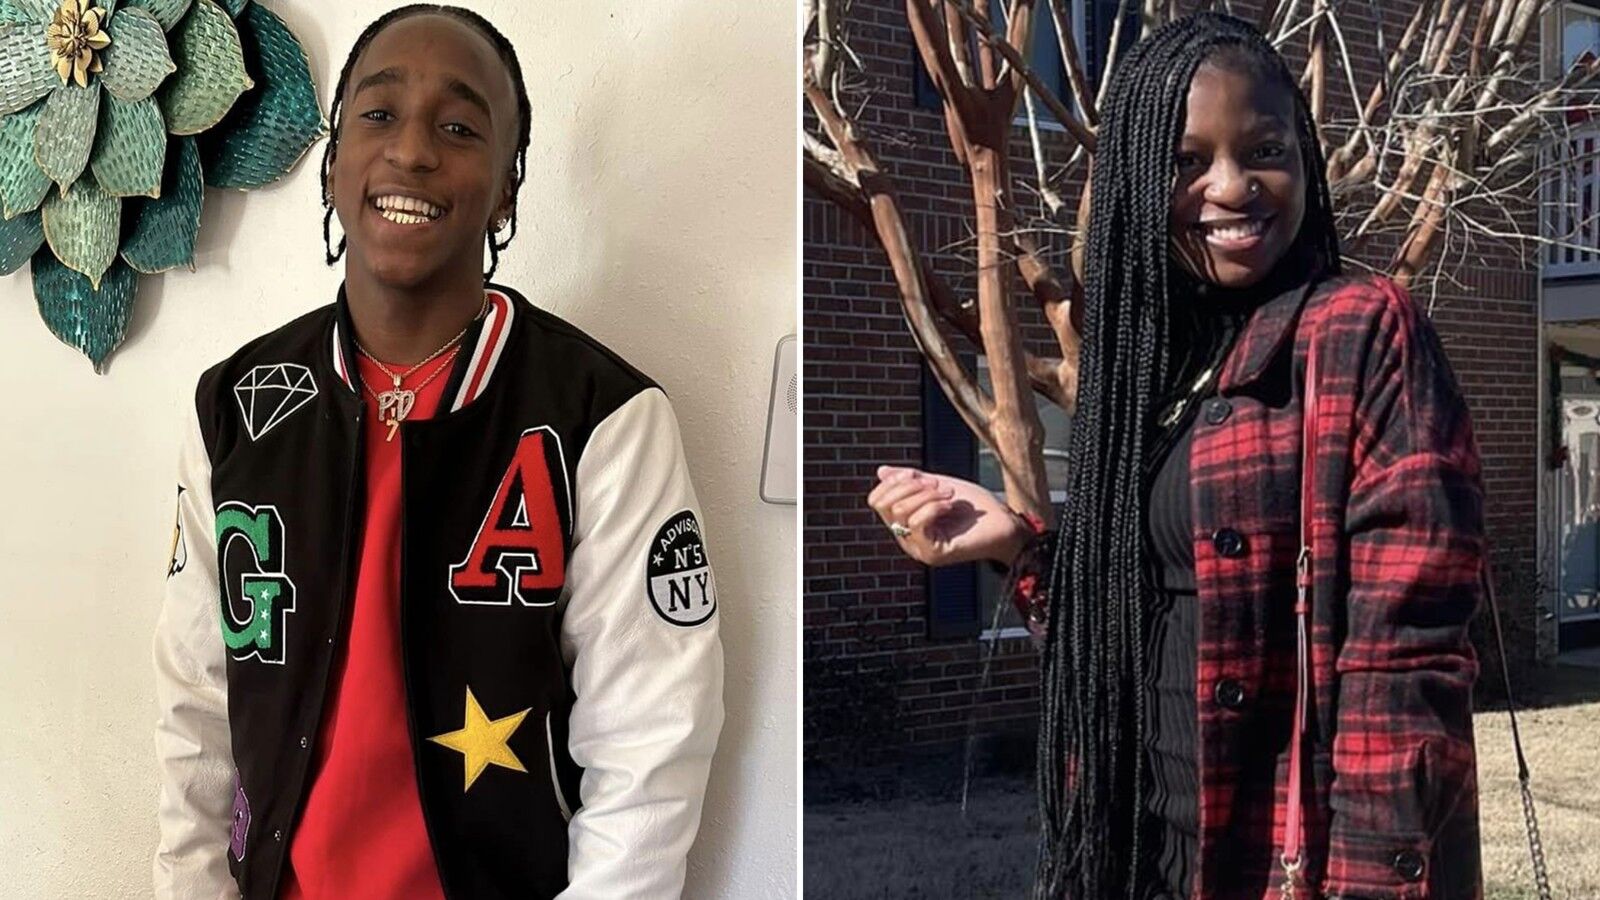 A pair of best friends, a gifted athlete and a college hopeful are among the victims of the Alabama Sweet 16 birthday party shooting